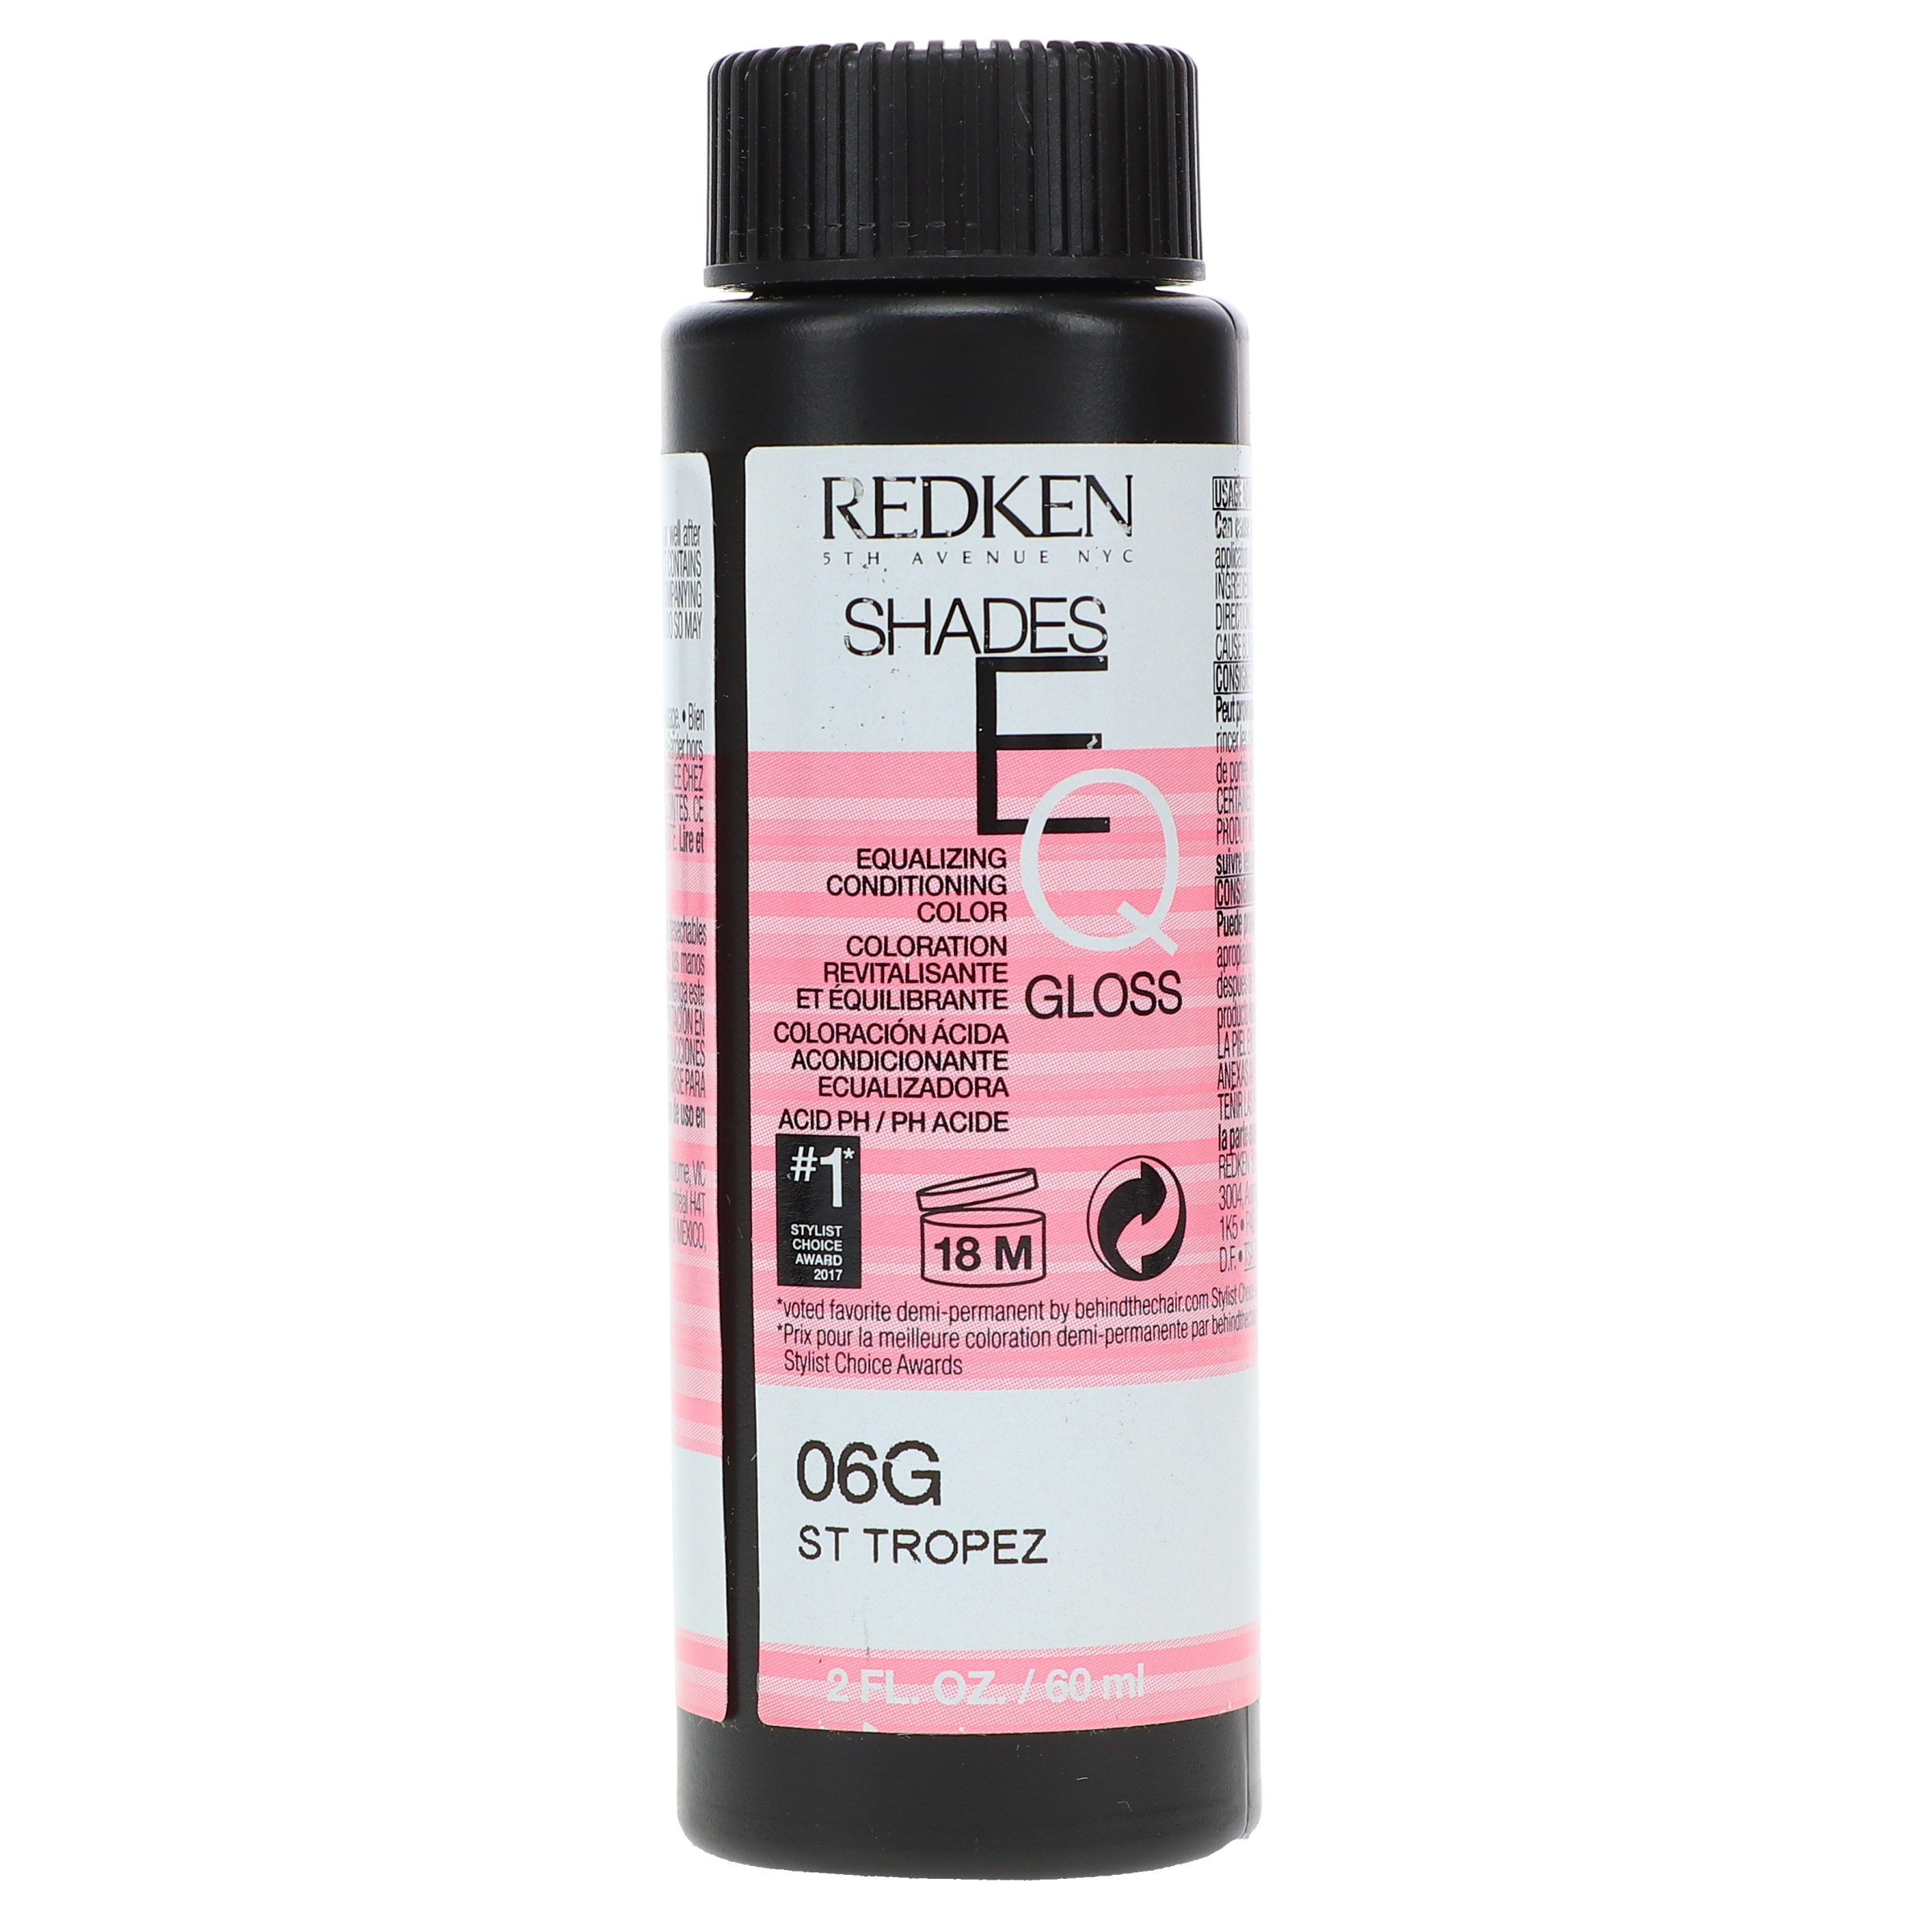 Redken Shades Eq Hair Color Gloss 06G - St.Tropez For Women, 2 Oz - image 1 of 2